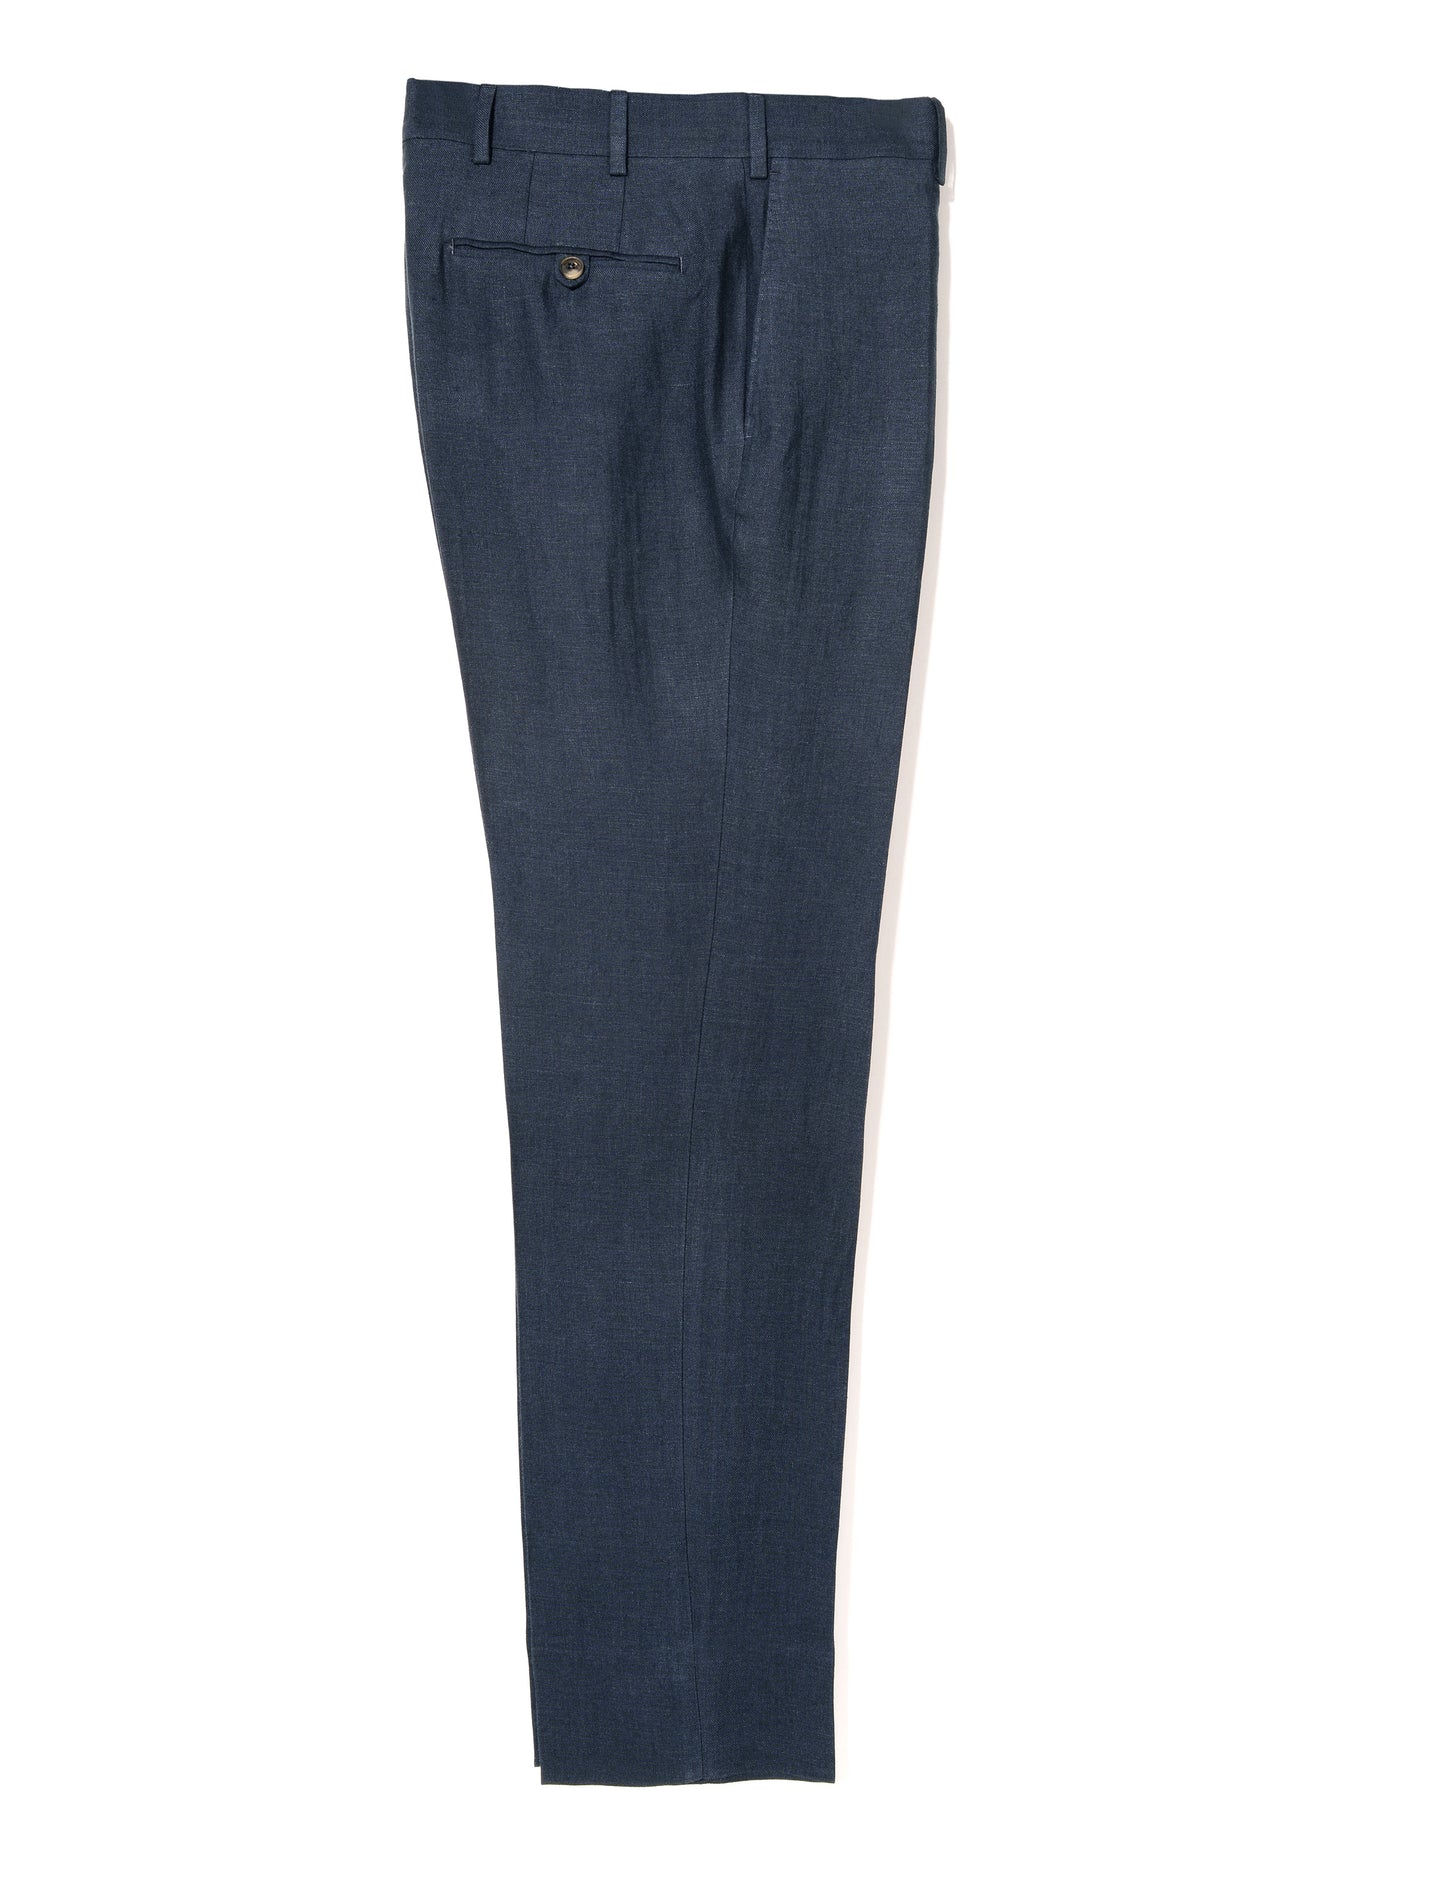 BKT50 Tailored Trousers in Linen Twill - Salerno Blue